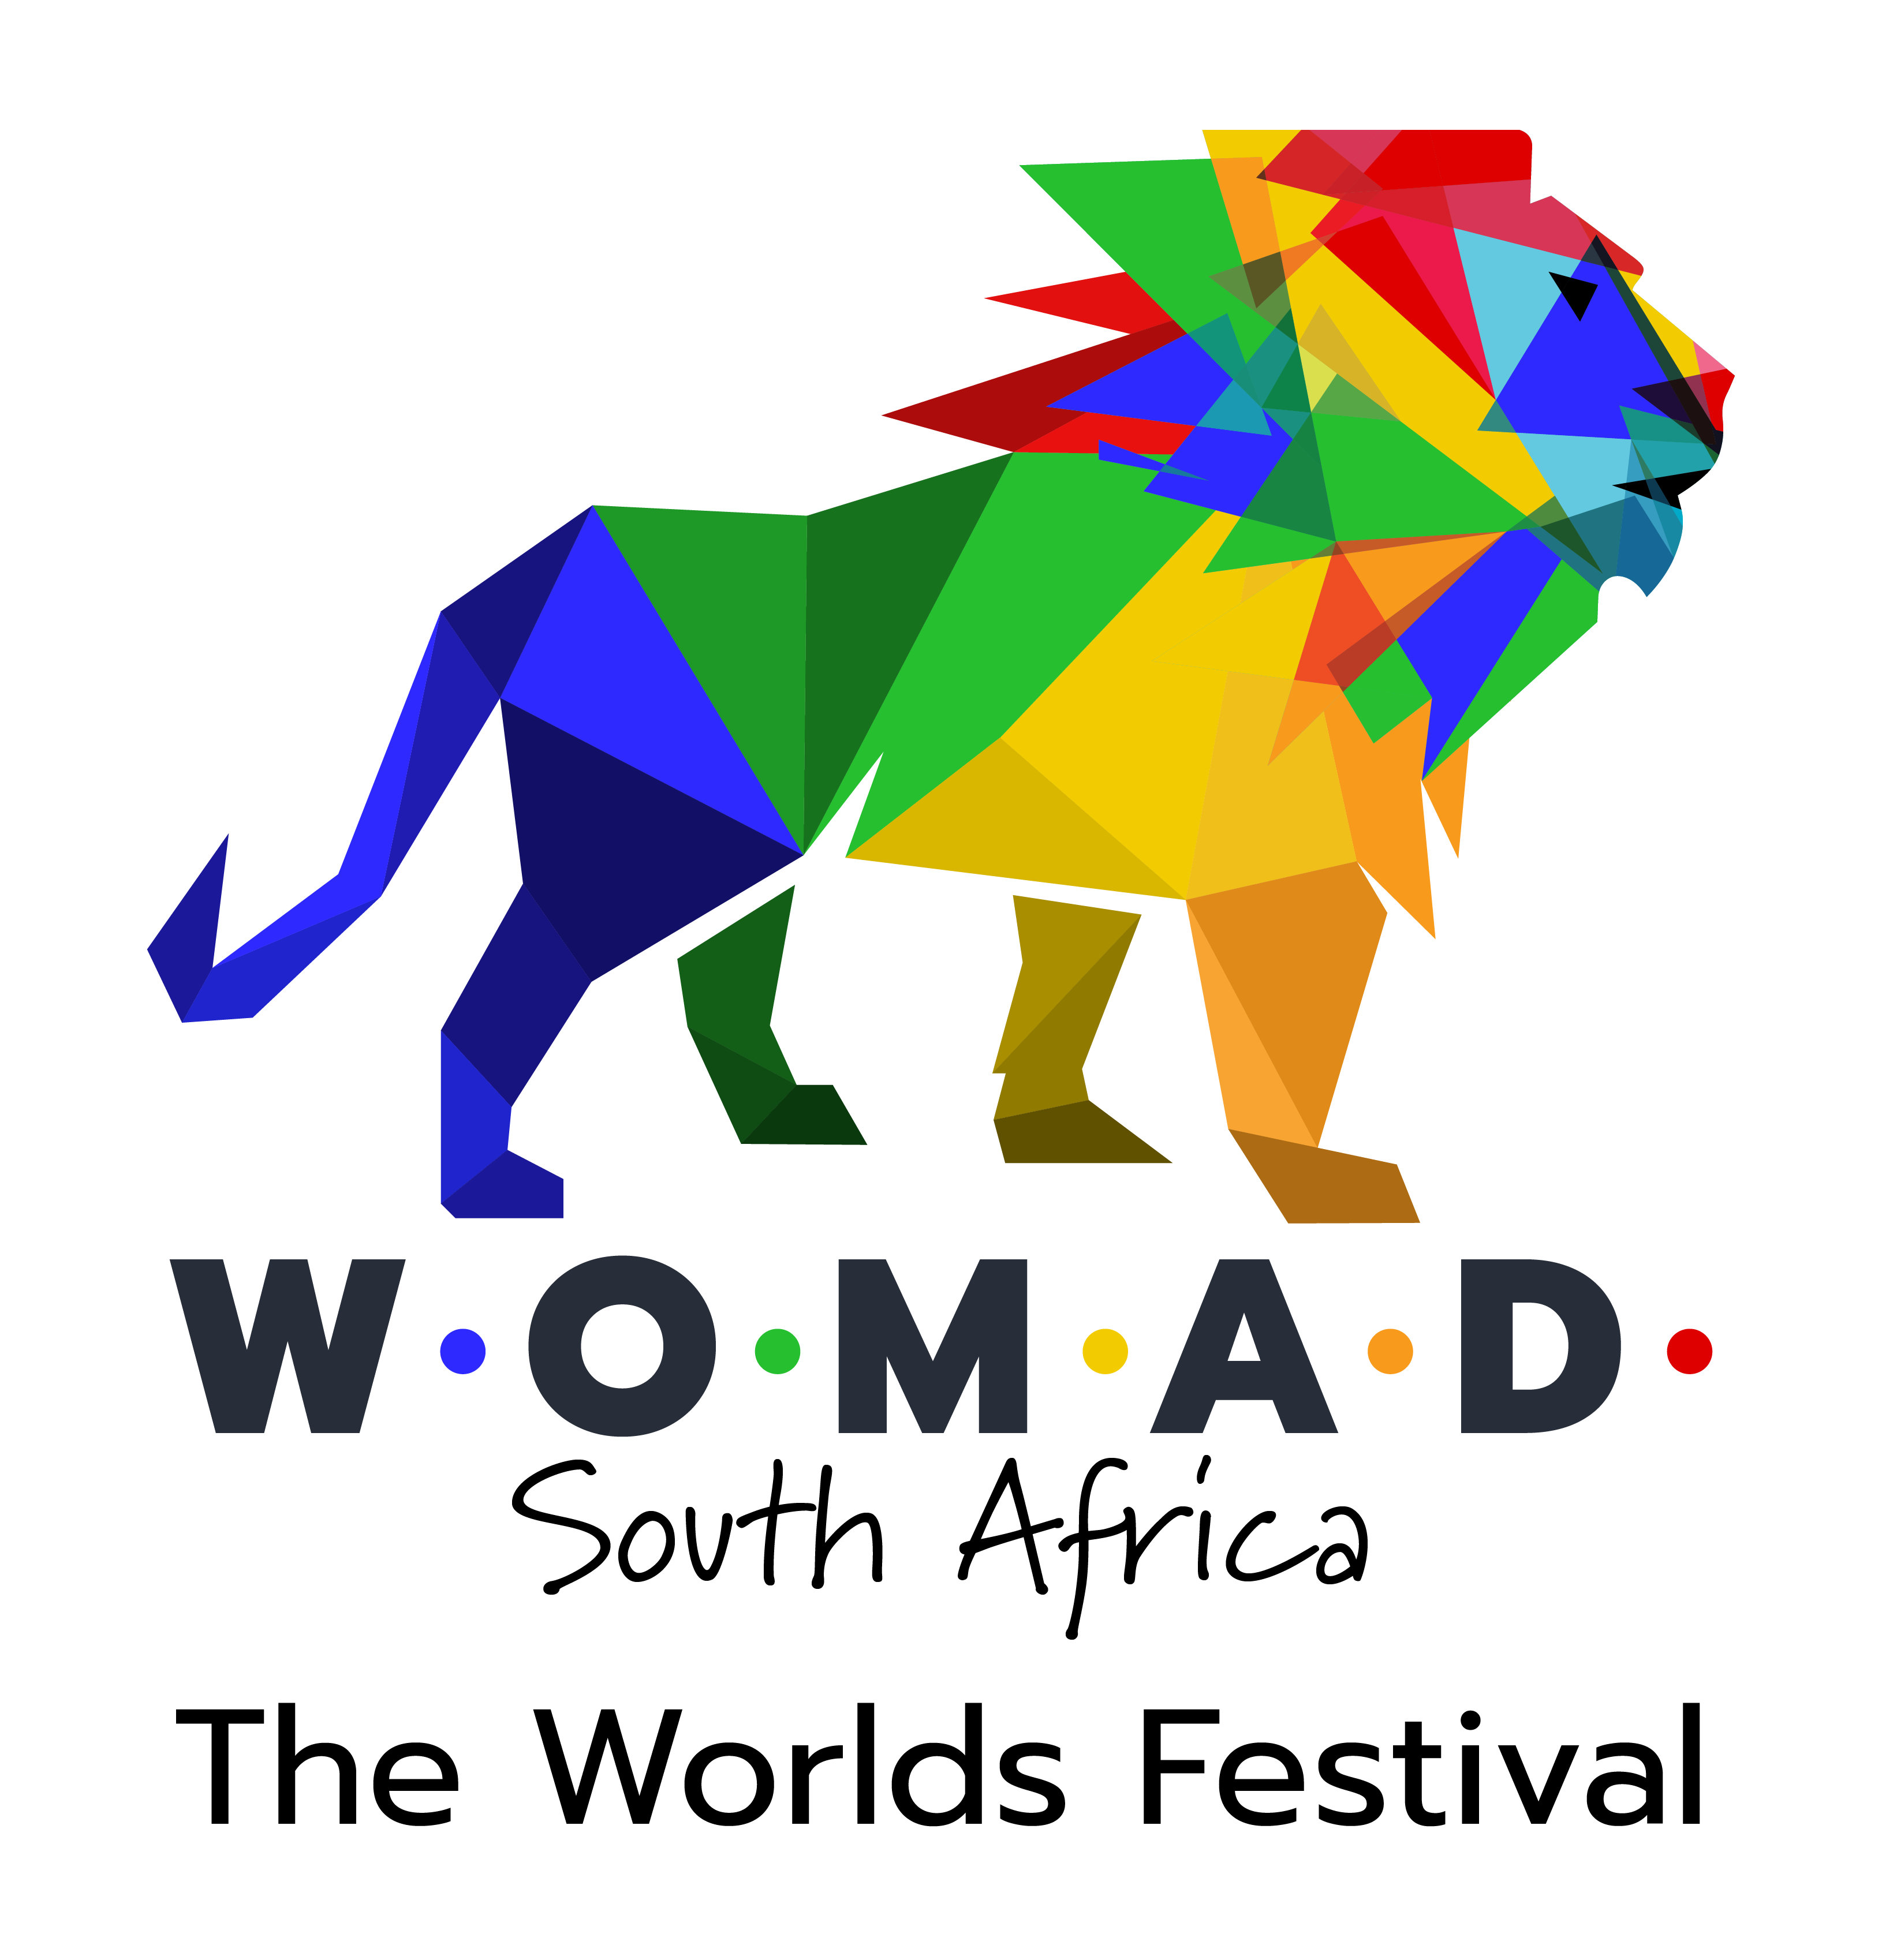 WOMAD South Africa